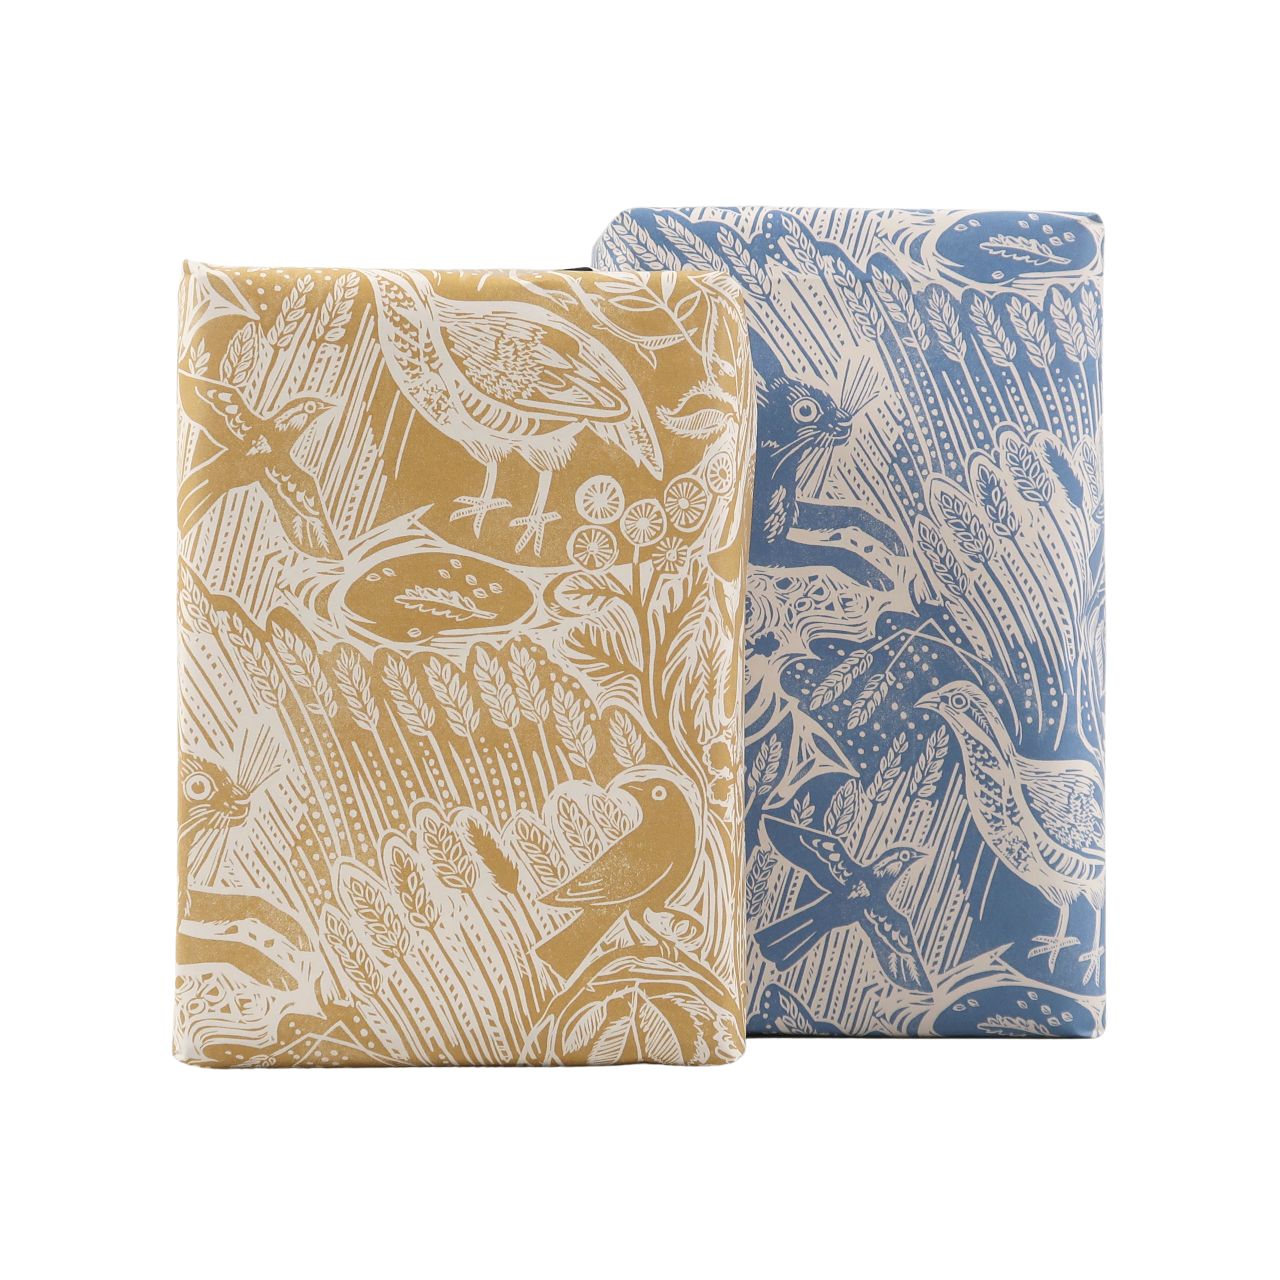 Art Angels Harvest Hare Gift Wrap by Mark Hearld - 10 sheets